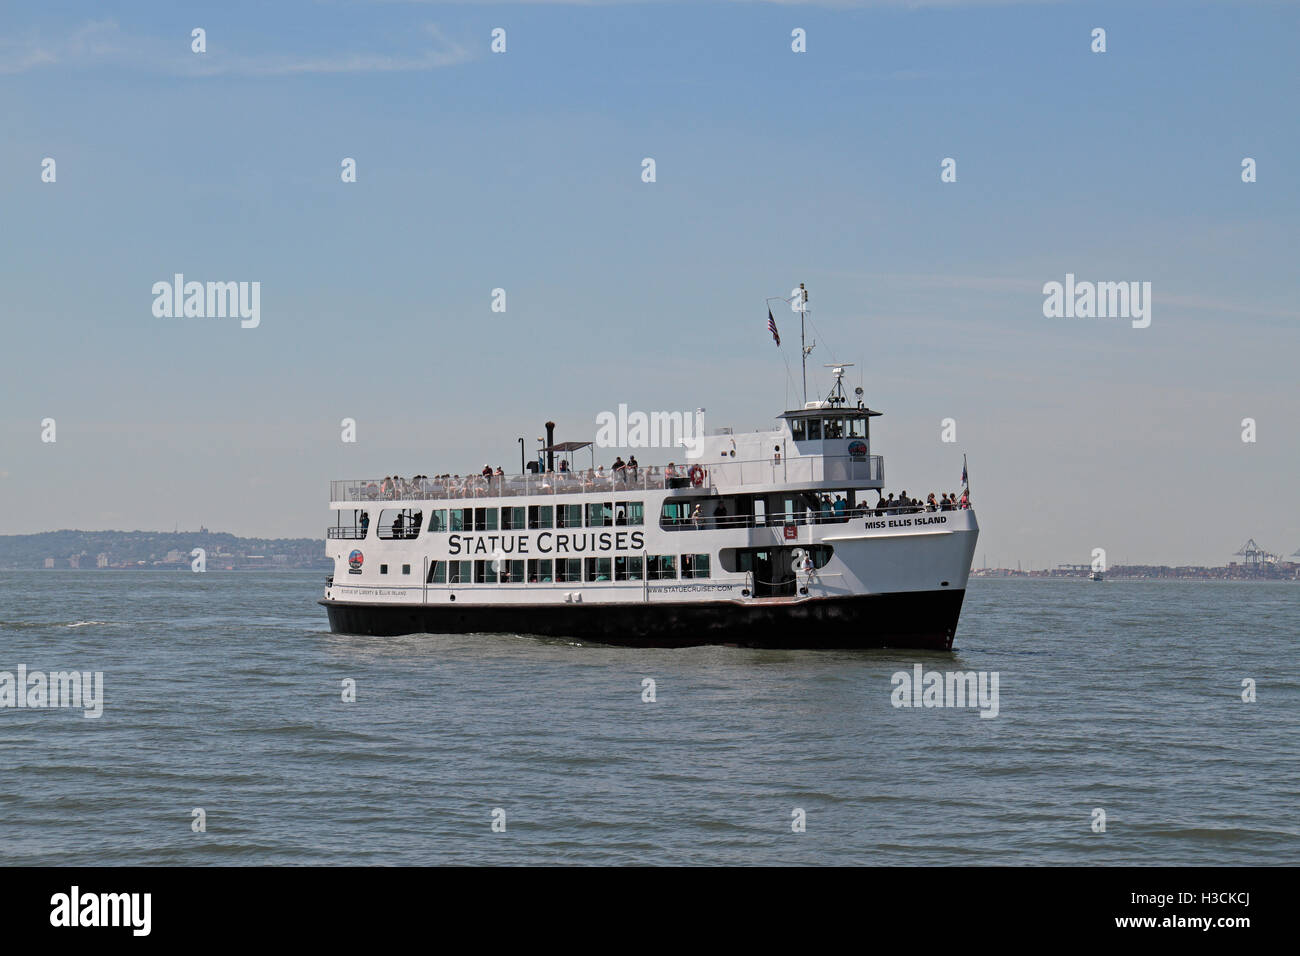 A Statue of Liberty ferry in Upper New York Bay, Manhattan, New York, United States. Stock Photo